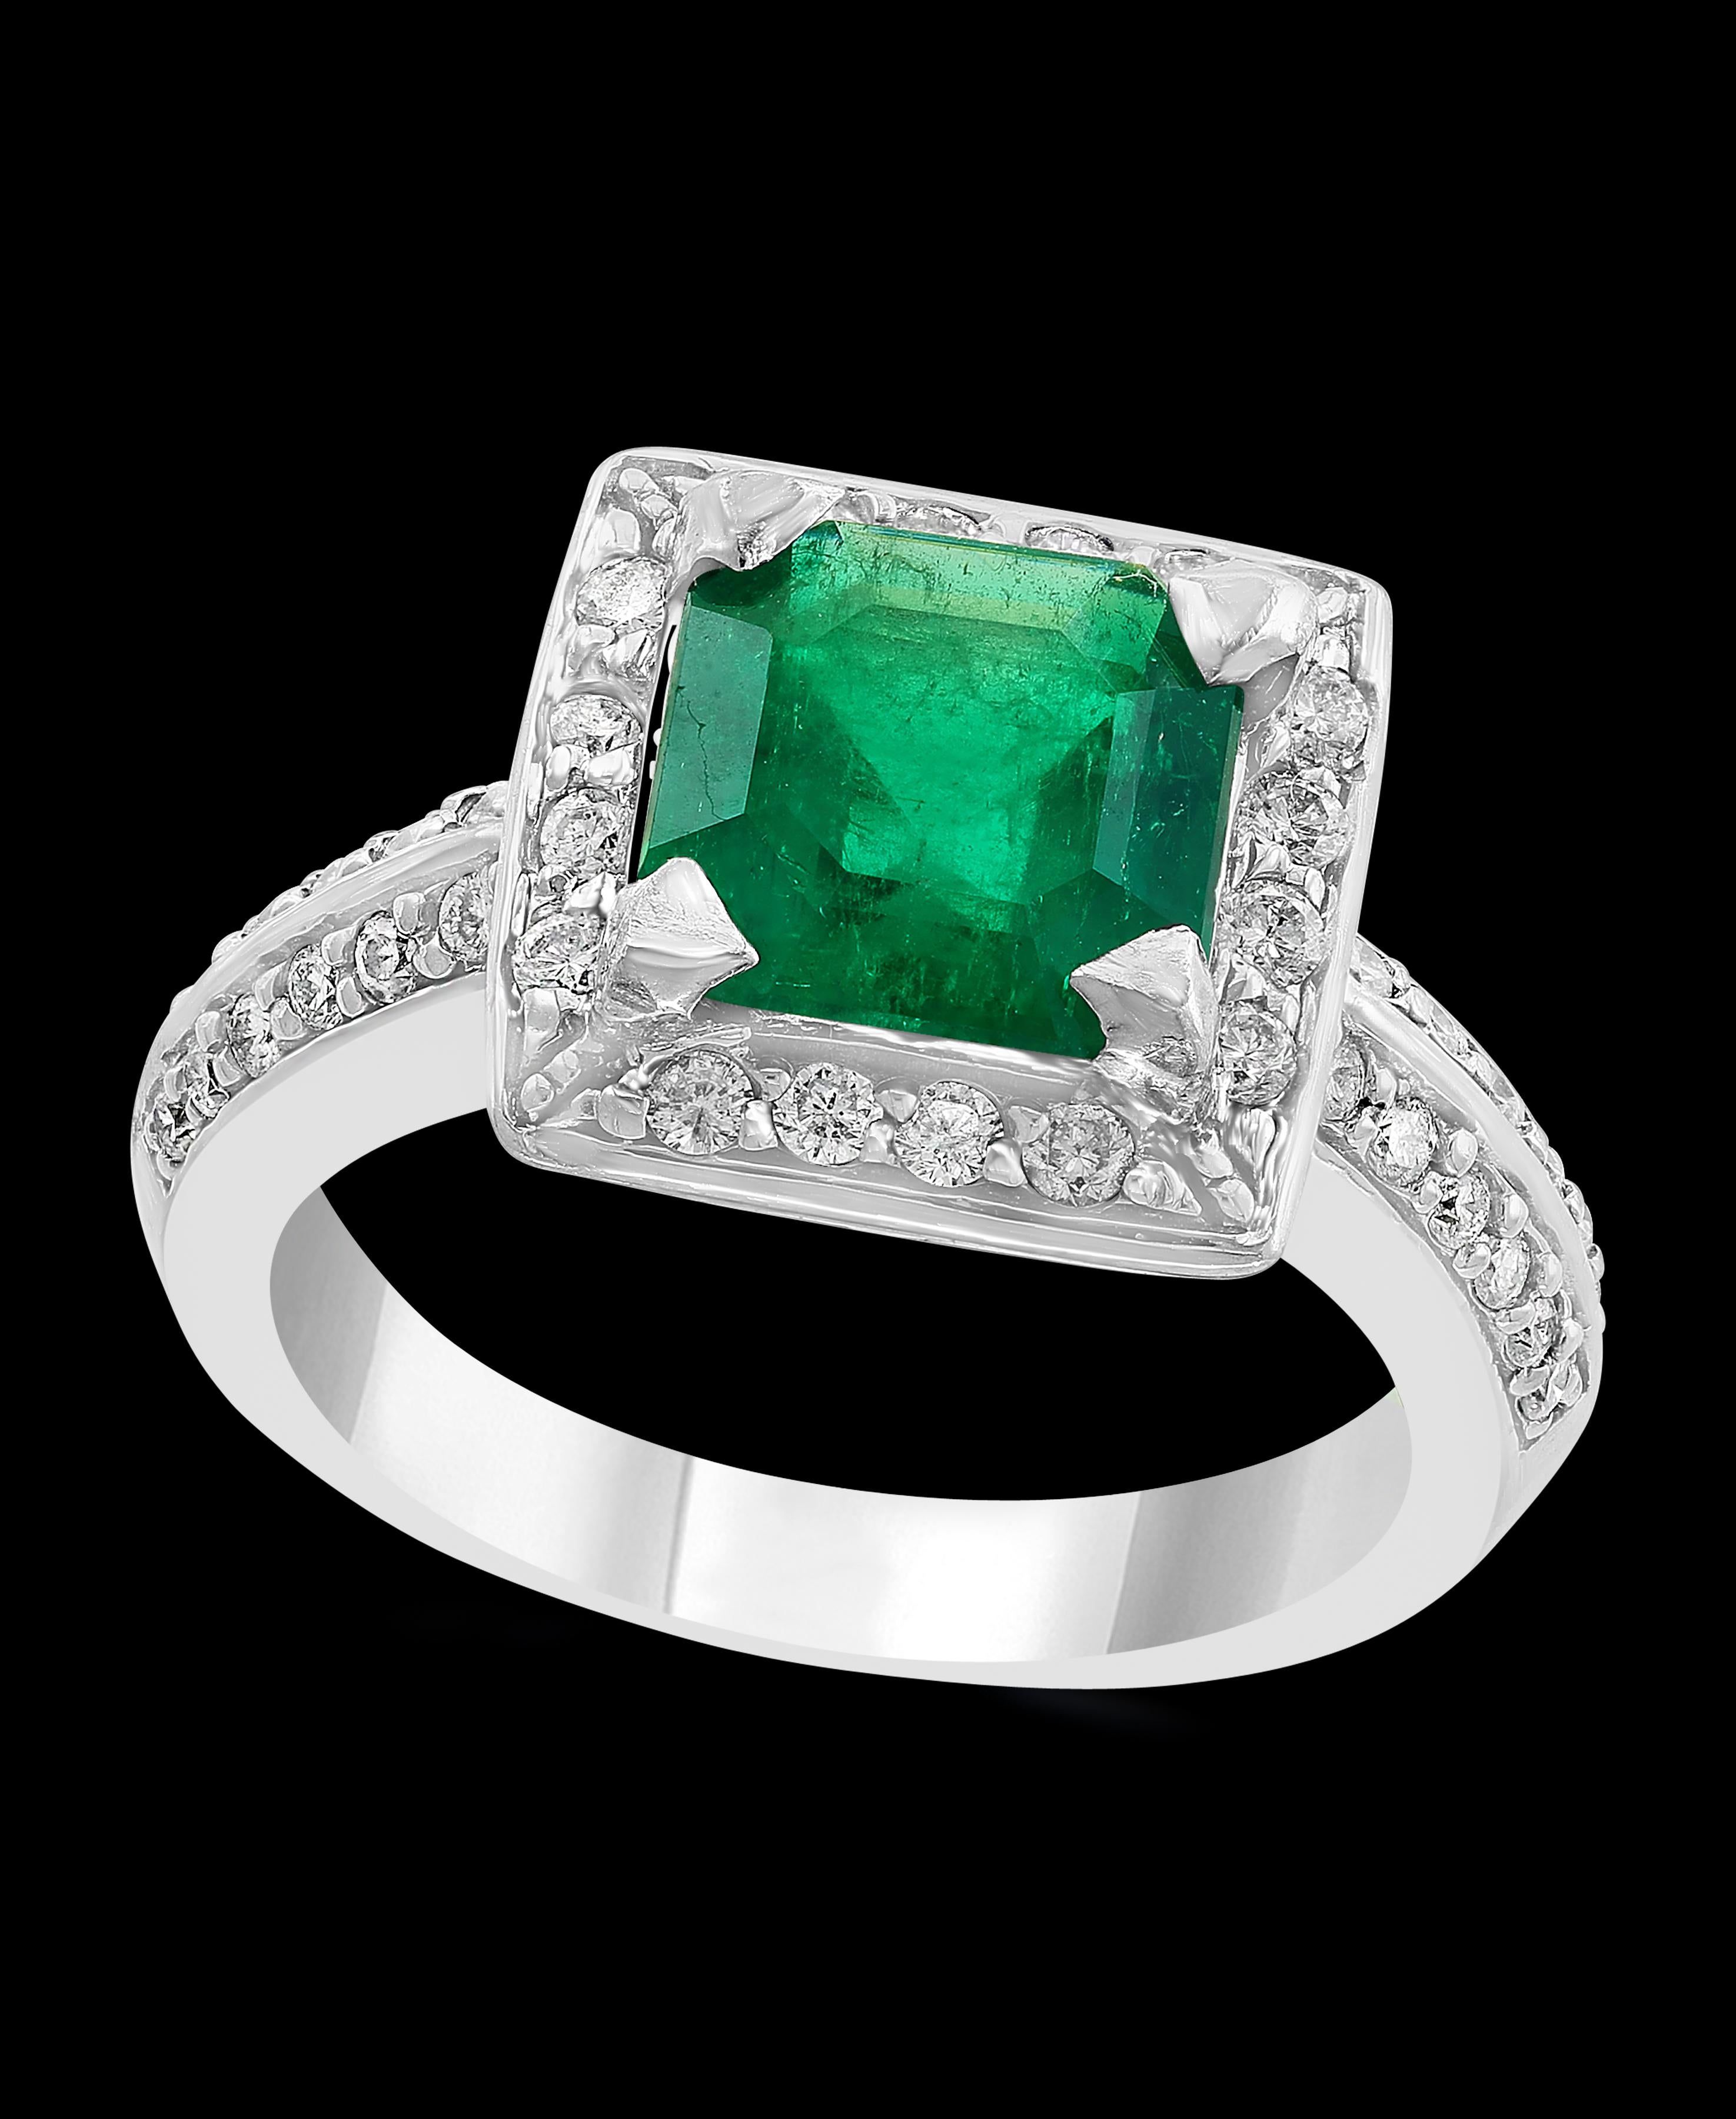 A classic, Cocktail ring 
2.8 Carat  Colombian Emerald and Diamond Ring, Estate, no color enhancement.
Gold: 14 carat white gold 
Weight: 7.5 gm
 Diamonds: approximate 0.85 Carat 
Emerald: 2.8 Carat 
Ring size 6.7
Origin : Colombia 
Color: Deep 